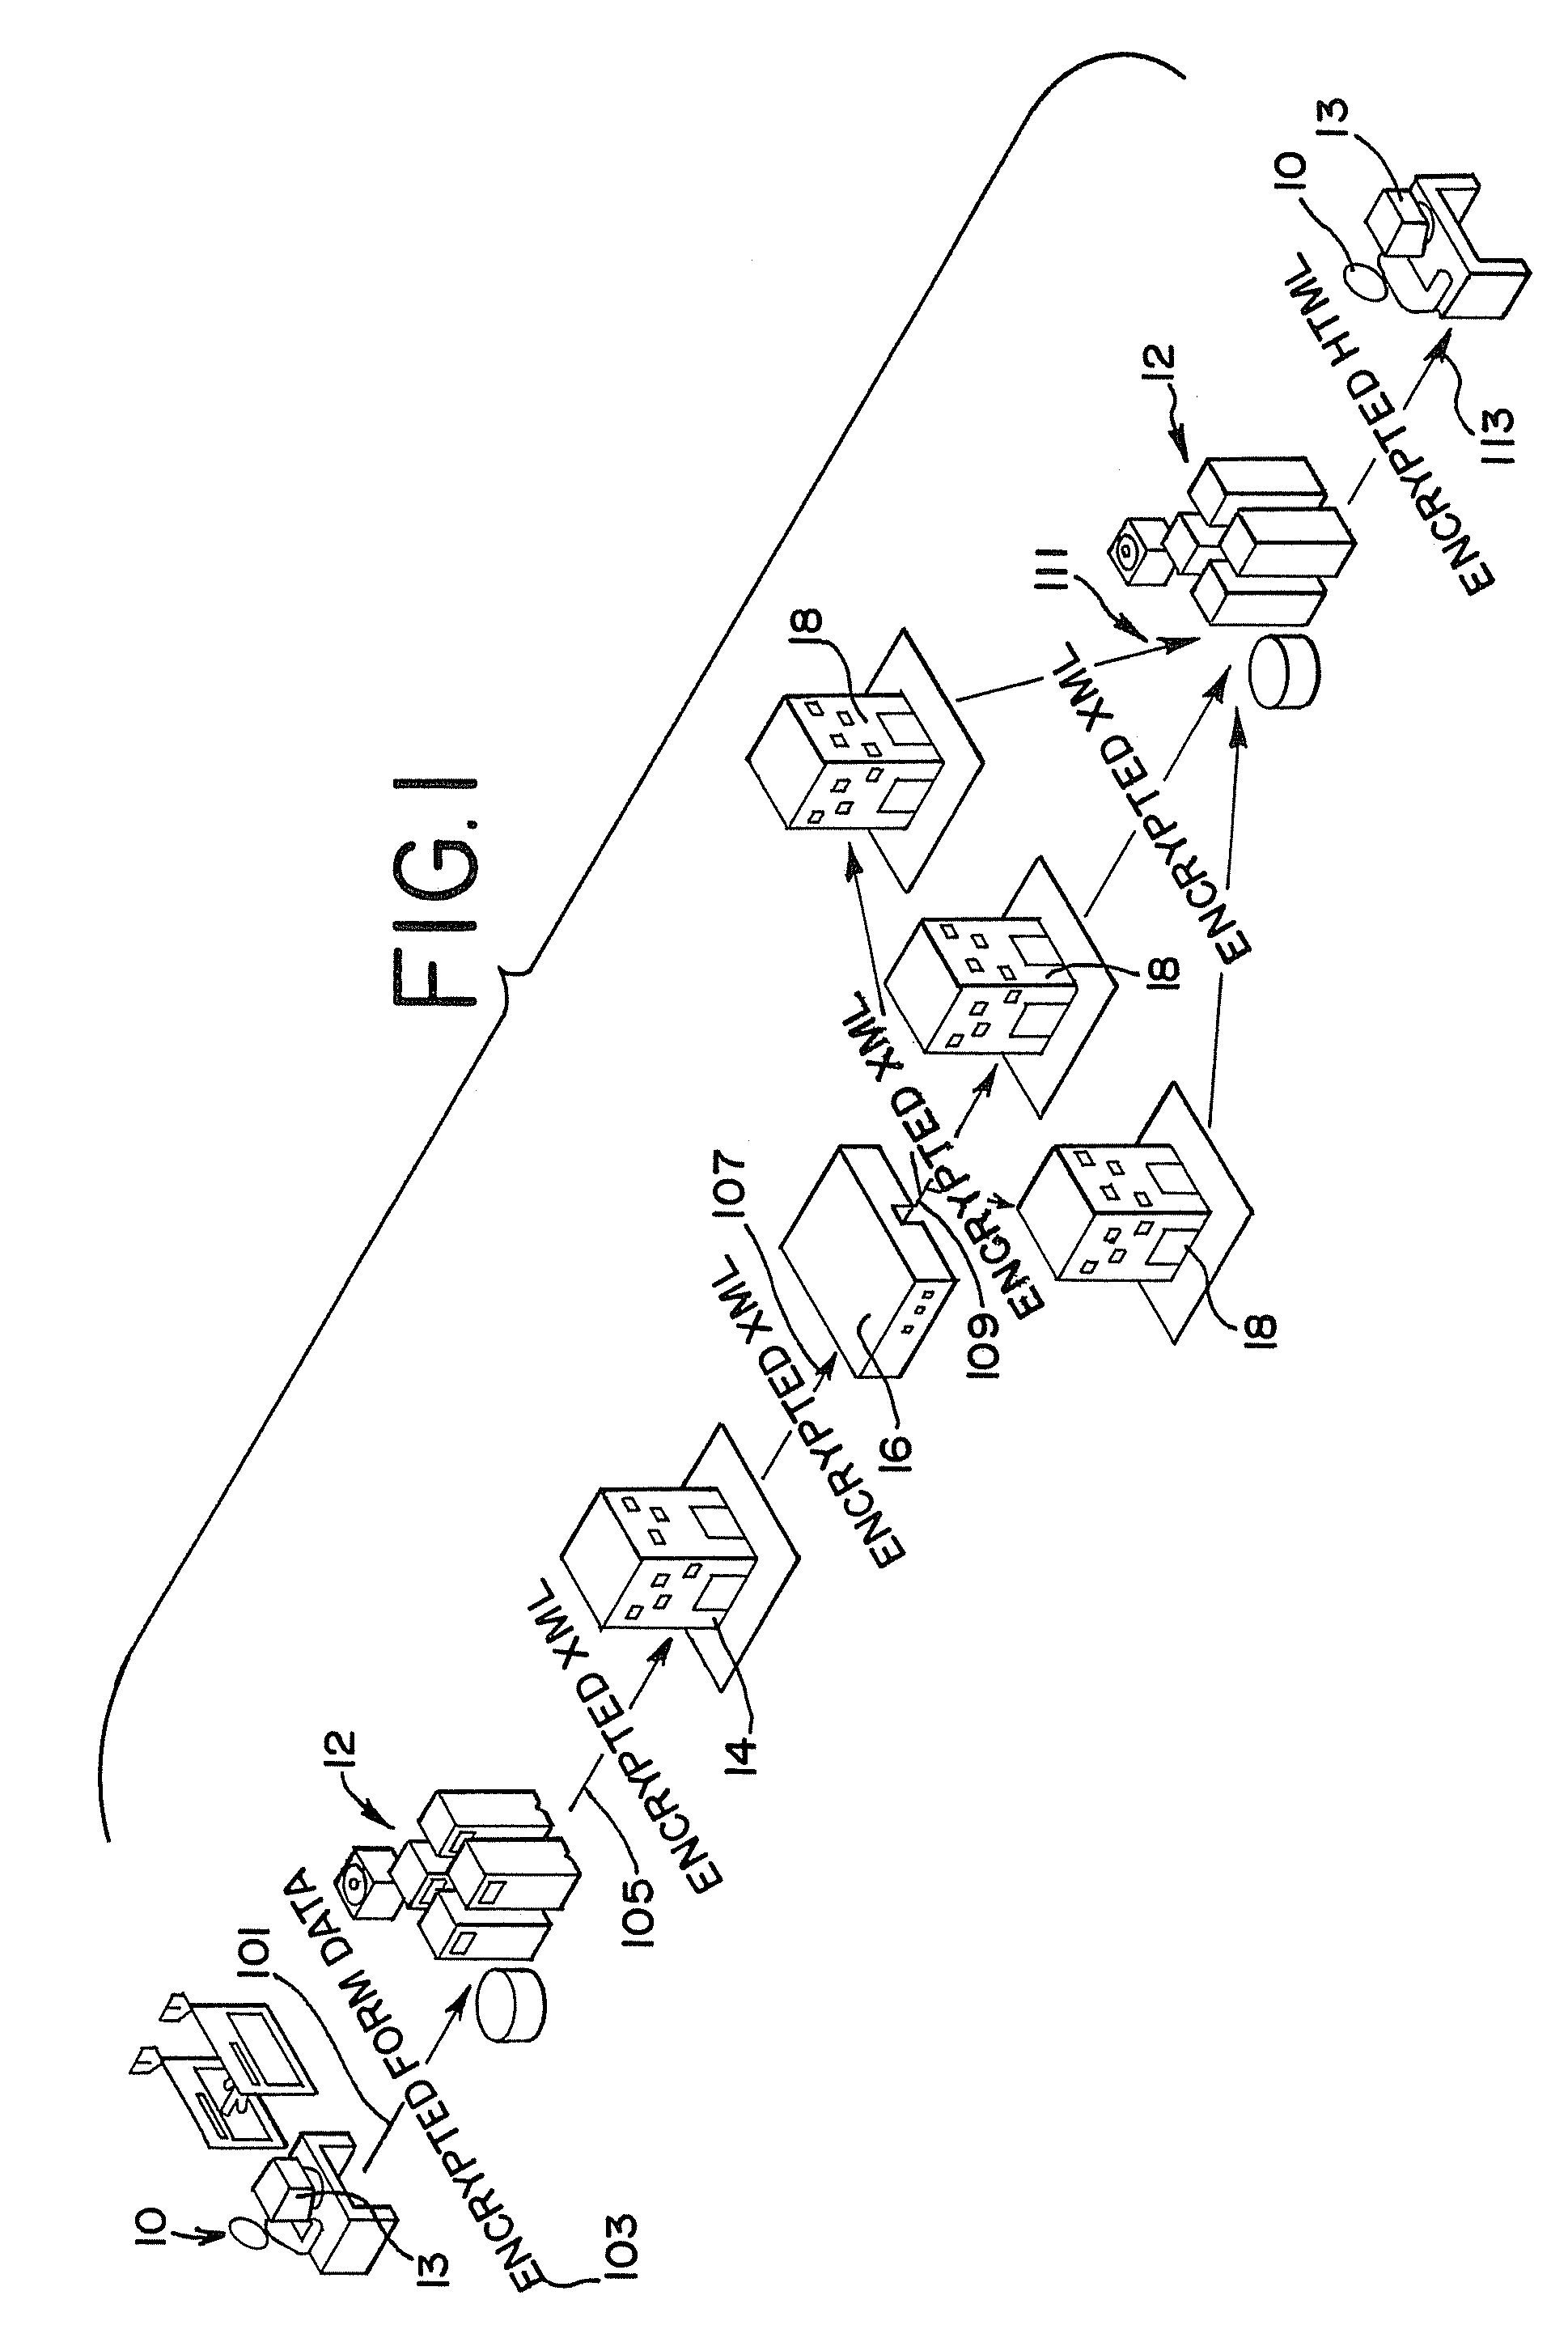 System and method for matching loan consumers and lenders